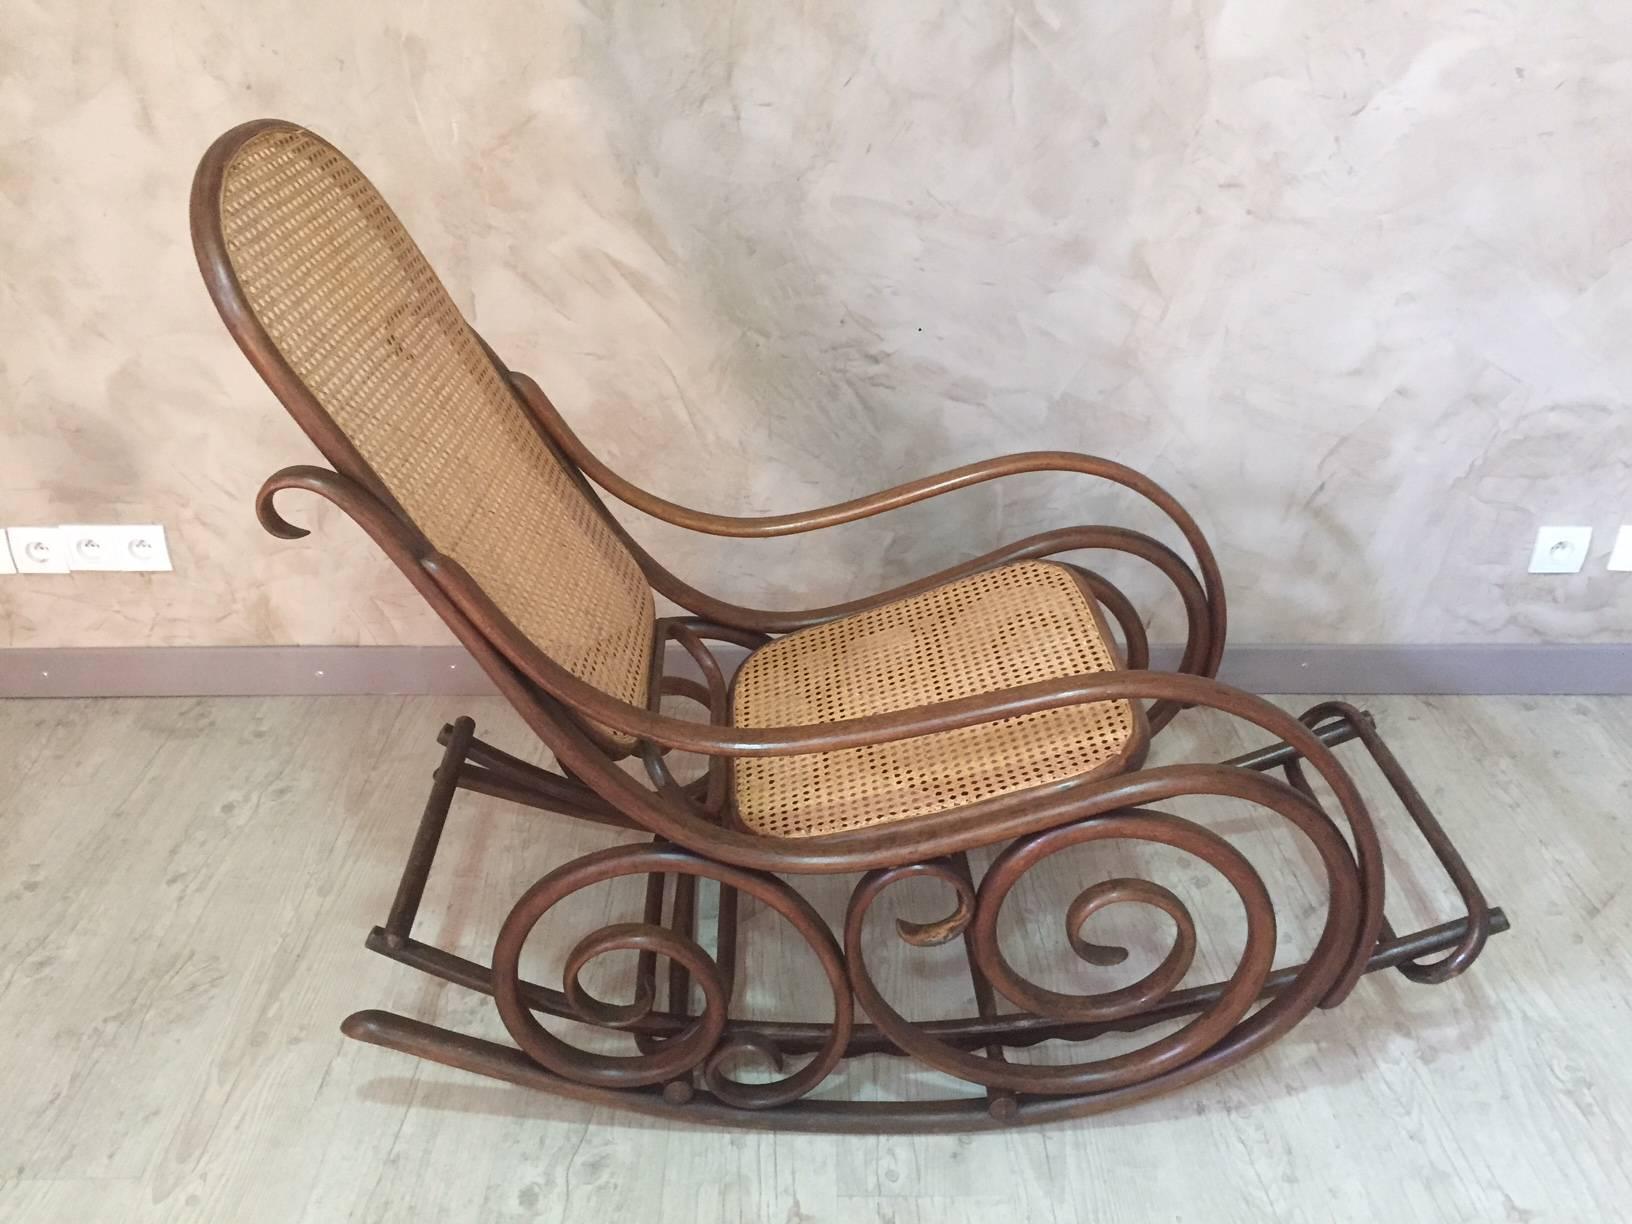 Really nice rocking chair by The famous manufacturer 